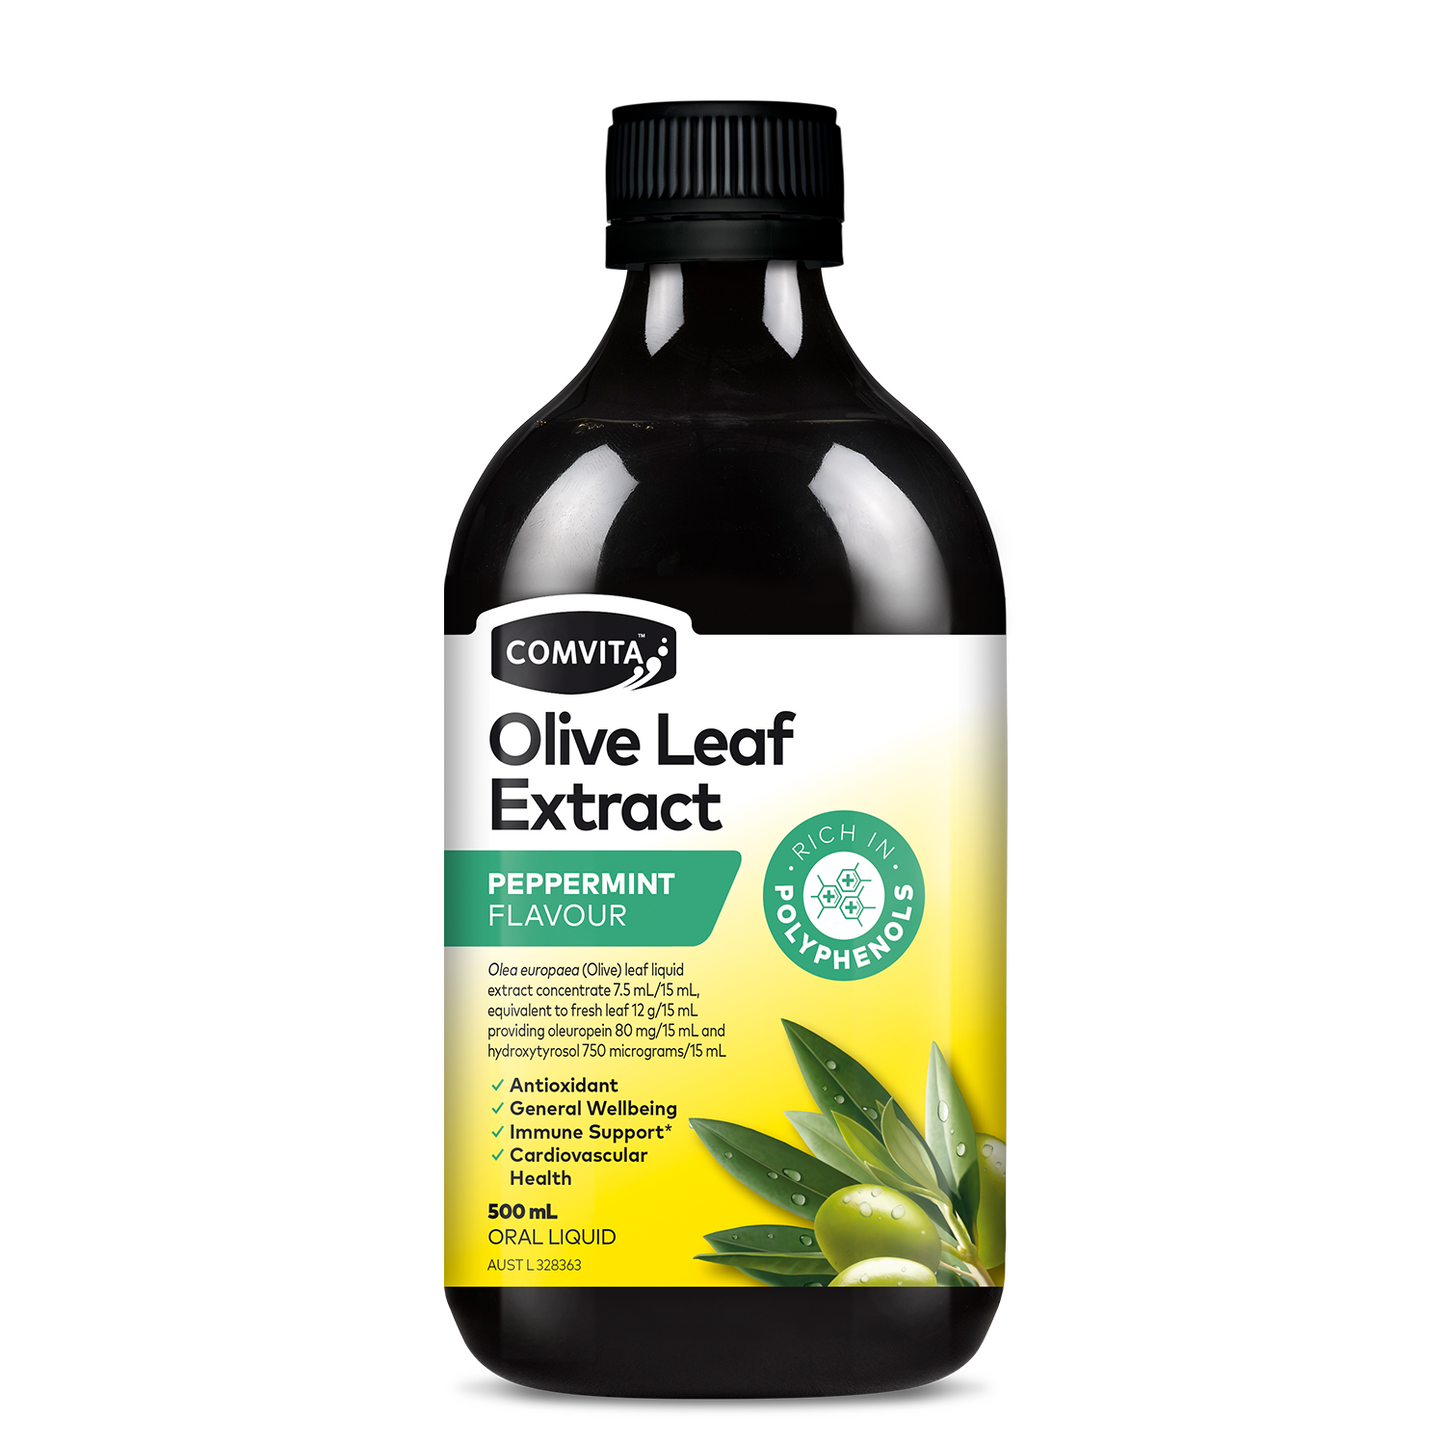 30% Off [Bundle of 6] Comvita Olive Leaf Extract - Peppermint Flavor, 500 ml.